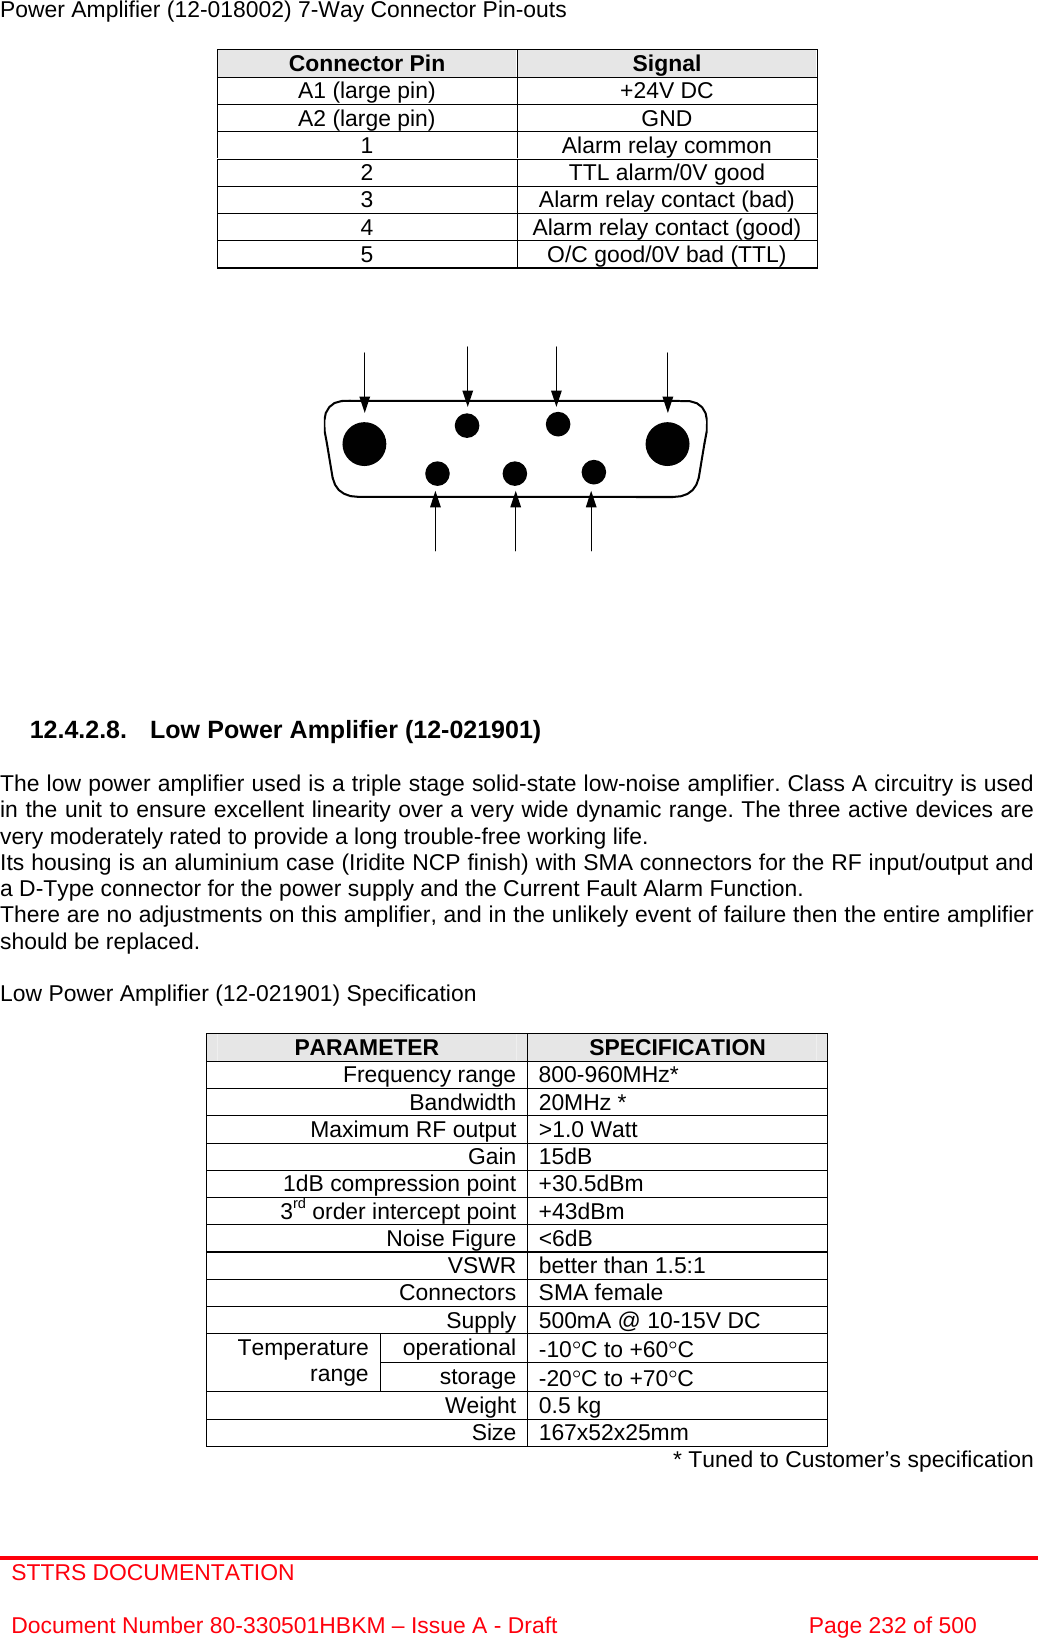 STTRS DOCUMENTATION  Document Number 80-330501HBKM – Issue A - Draft  Page 232 of 500   Power Amplifier (12-018002) 7-Way Connector Pin-outs  Connector Pin  Signal A1 (large pin)  +24V DC A2 (large pin)  GND 1  Alarm relay common 2  TTL alarm/0V good 3  Alarm relay contact (bad) 4  Alarm relay contact (good) 5  O/C good/0V bad (TTL)                  12.4.2.8.  Low Power Amplifier (12-021901)  The low power amplifier used is a triple stage solid-state low-noise amplifier. Class A circuitry is used in the unit to ensure excellent linearity over a very wide dynamic range. The three active devices are very moderately rated to provide a long trouble-free working life.  Its housing is an aluminium case (Iridite NCP finish) with SMA connectors for the RF input/output and a D-Type connector for the power supply and the Current Fault Alarm Function. There are no adjustments on this amplifier, and in the unlikely event of failure then the entire amplifier should be replaced.  Low Power Amplifier (12-021901) Specification  PARAMETER  SPECIFICATION Frequency range 800-960MHz* Bandwidth 20MHz * Maximum RF output &gt;1.0 Watt Gain 15dB 1dB compression point +30.5dBm 3rd order intercept point +43dBm Noise Figure &lt;6dB VSWR better than 1.5:1 Connectors SMA female Supply 500mA @ 10-15V DC operational -10°C to +60°C Temperature range  storage -20°C to +70°C Weight 0.5 kg Size 167x52x25mm * Tuned to Customer’s specification 